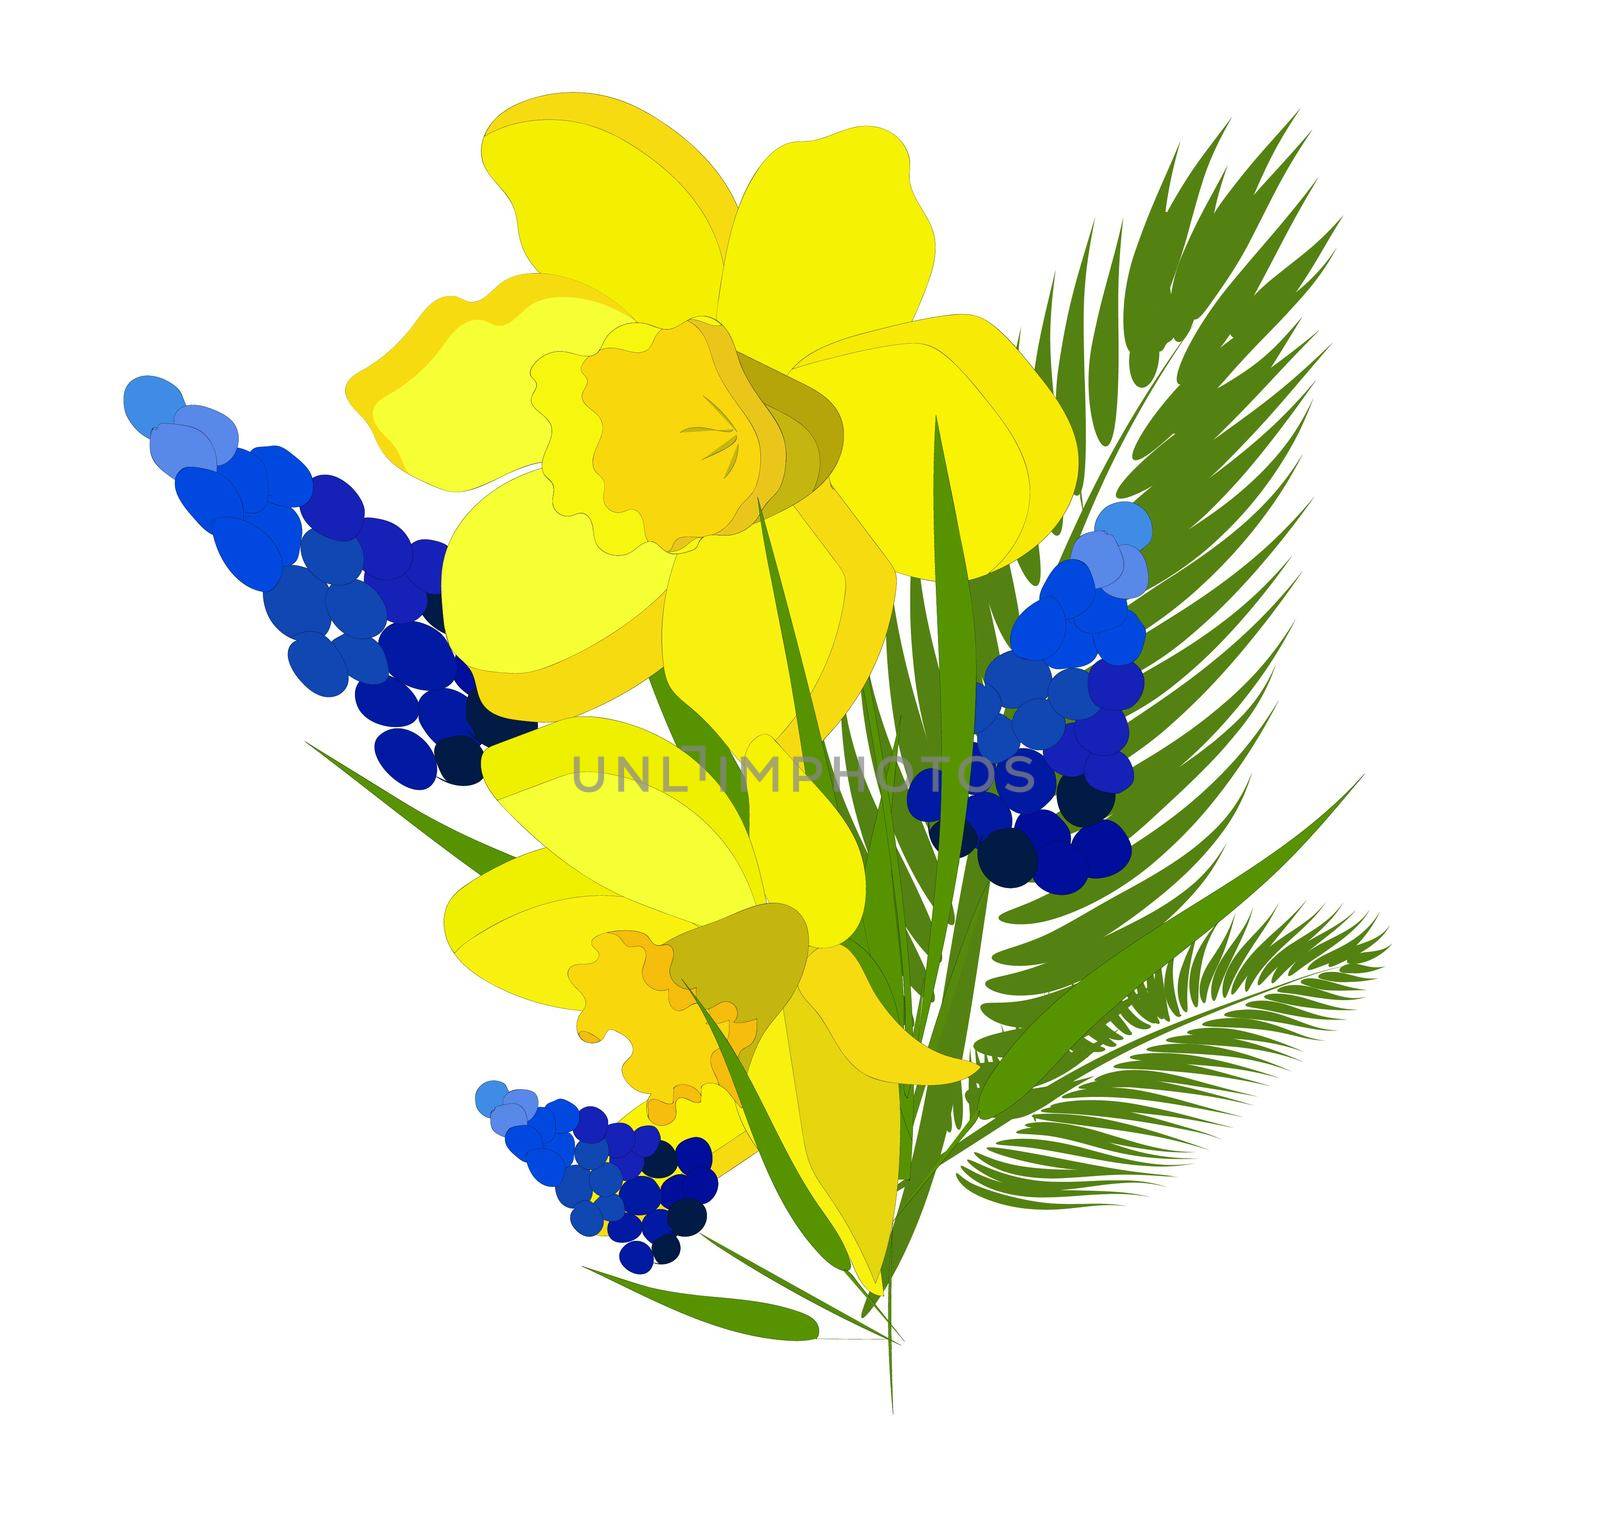 Bouquet of spring flowers isolated on white background. illustration. Tulips, daffodils and twigs of palm trees. Isolated element for creating postcards.. by annatarankova